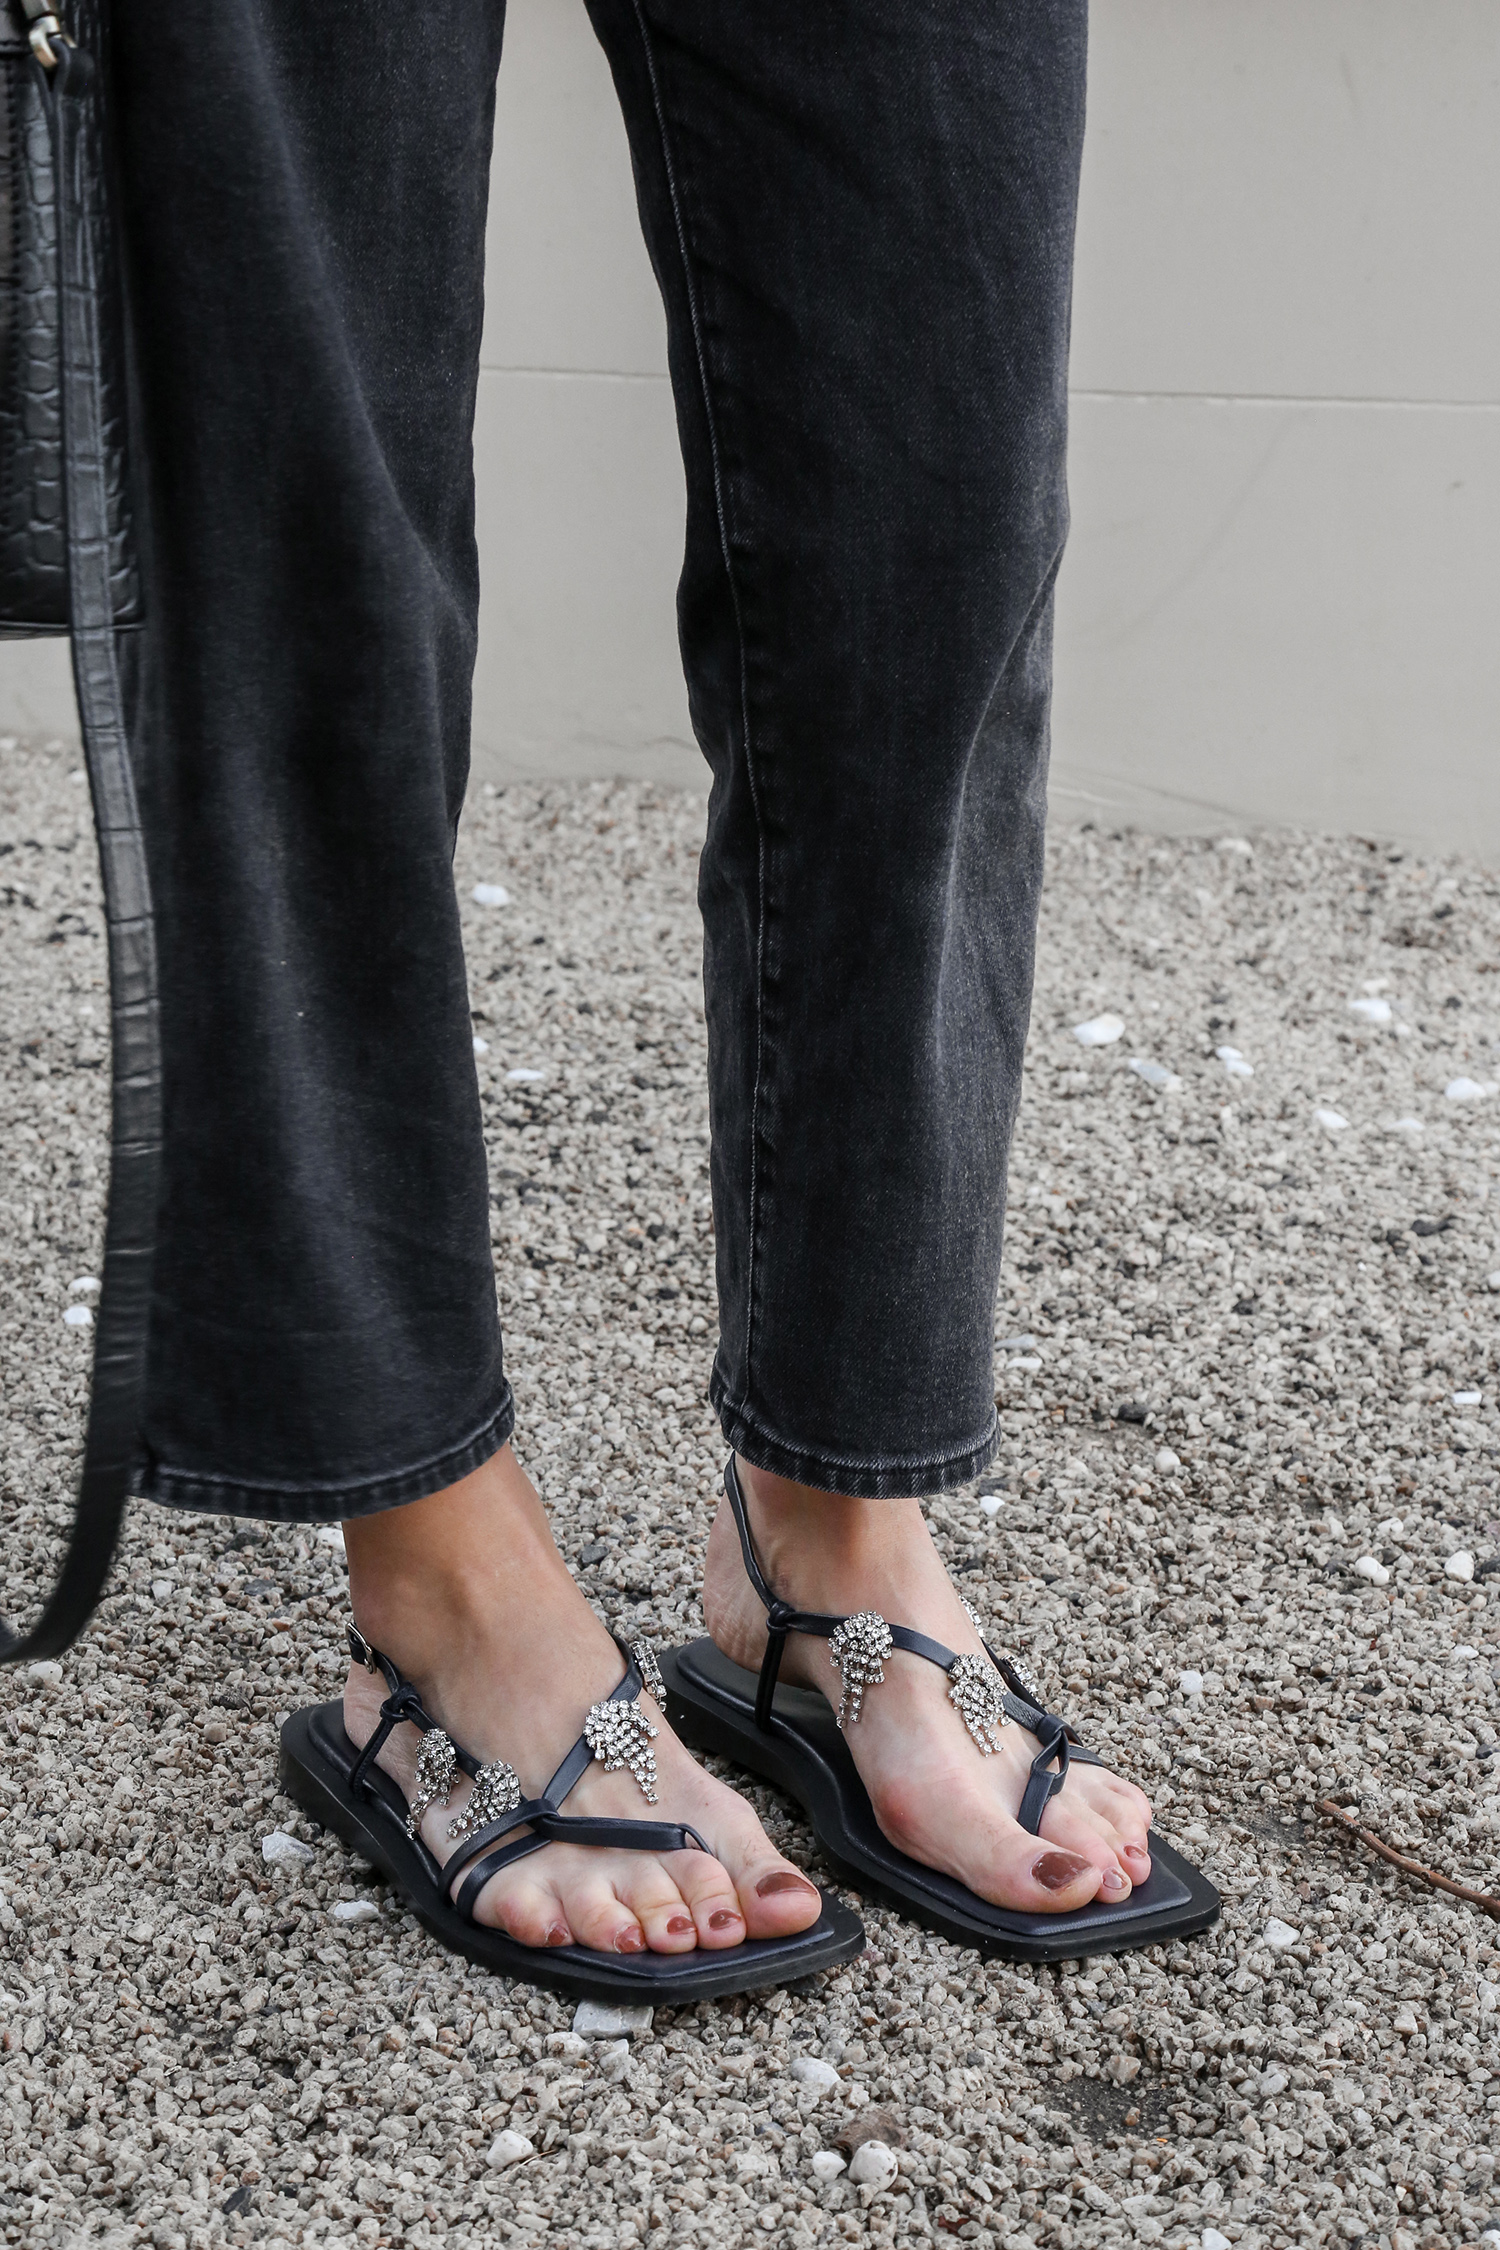 Tibi Julius Sandals in navy leather with crystal embellishment